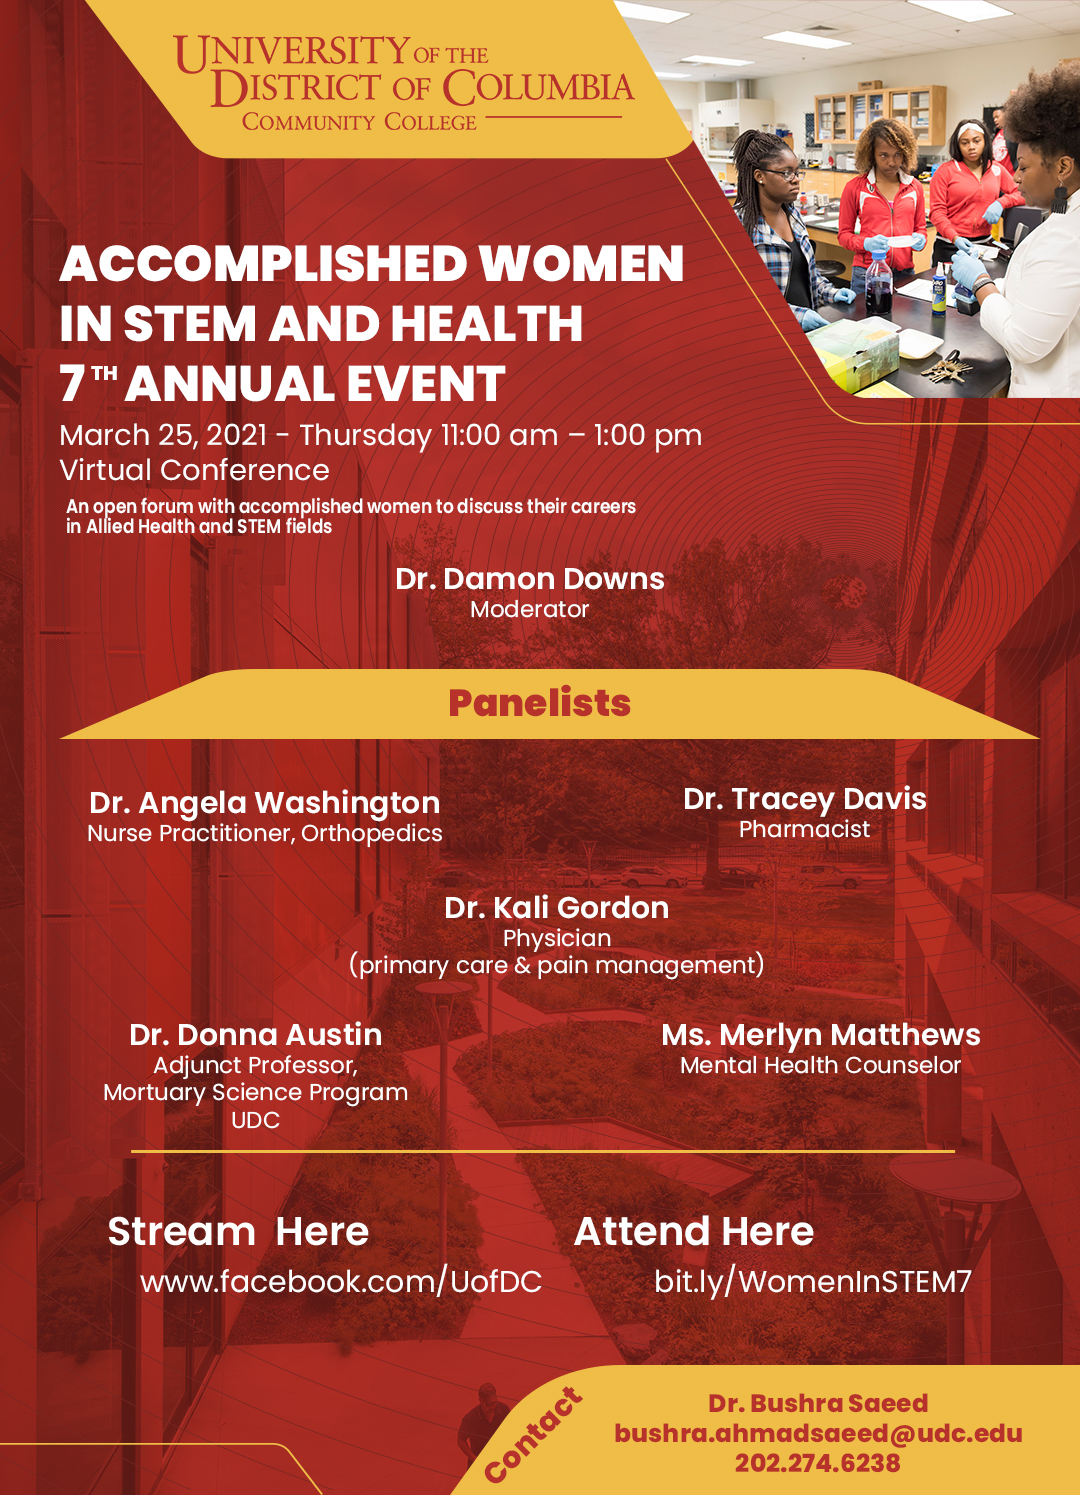 7th Annual Women in STEM Conference – March 25, 2021 @ 11am